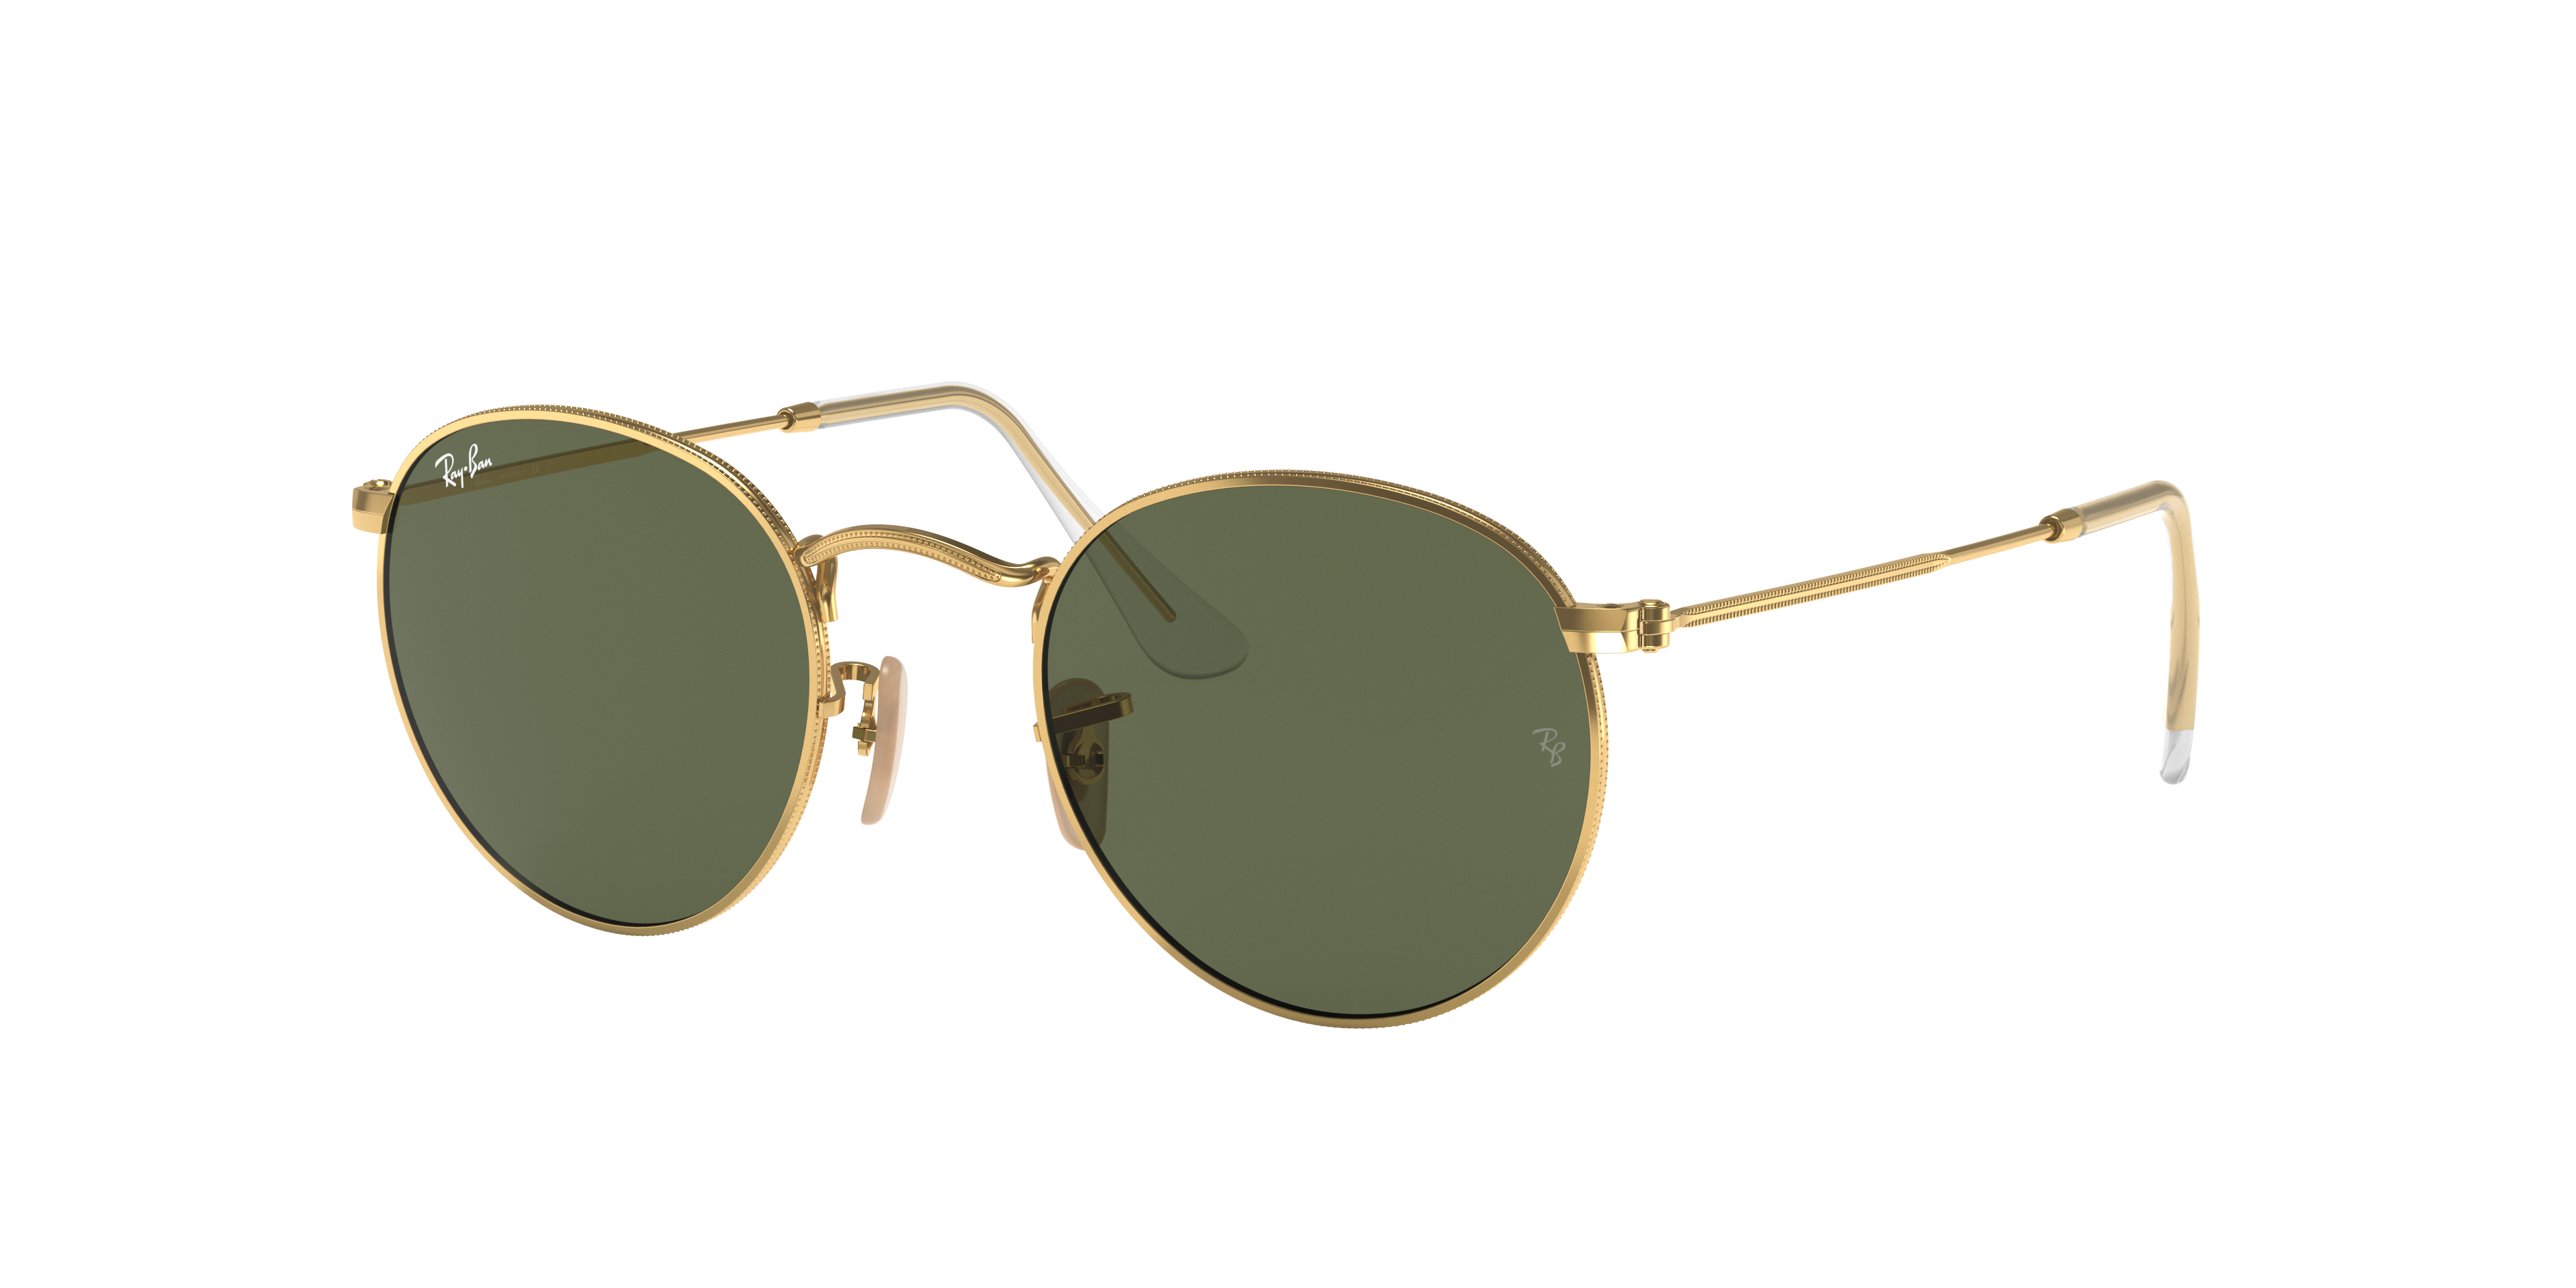 Check out the Round Flat Lenses at ray-ban.com